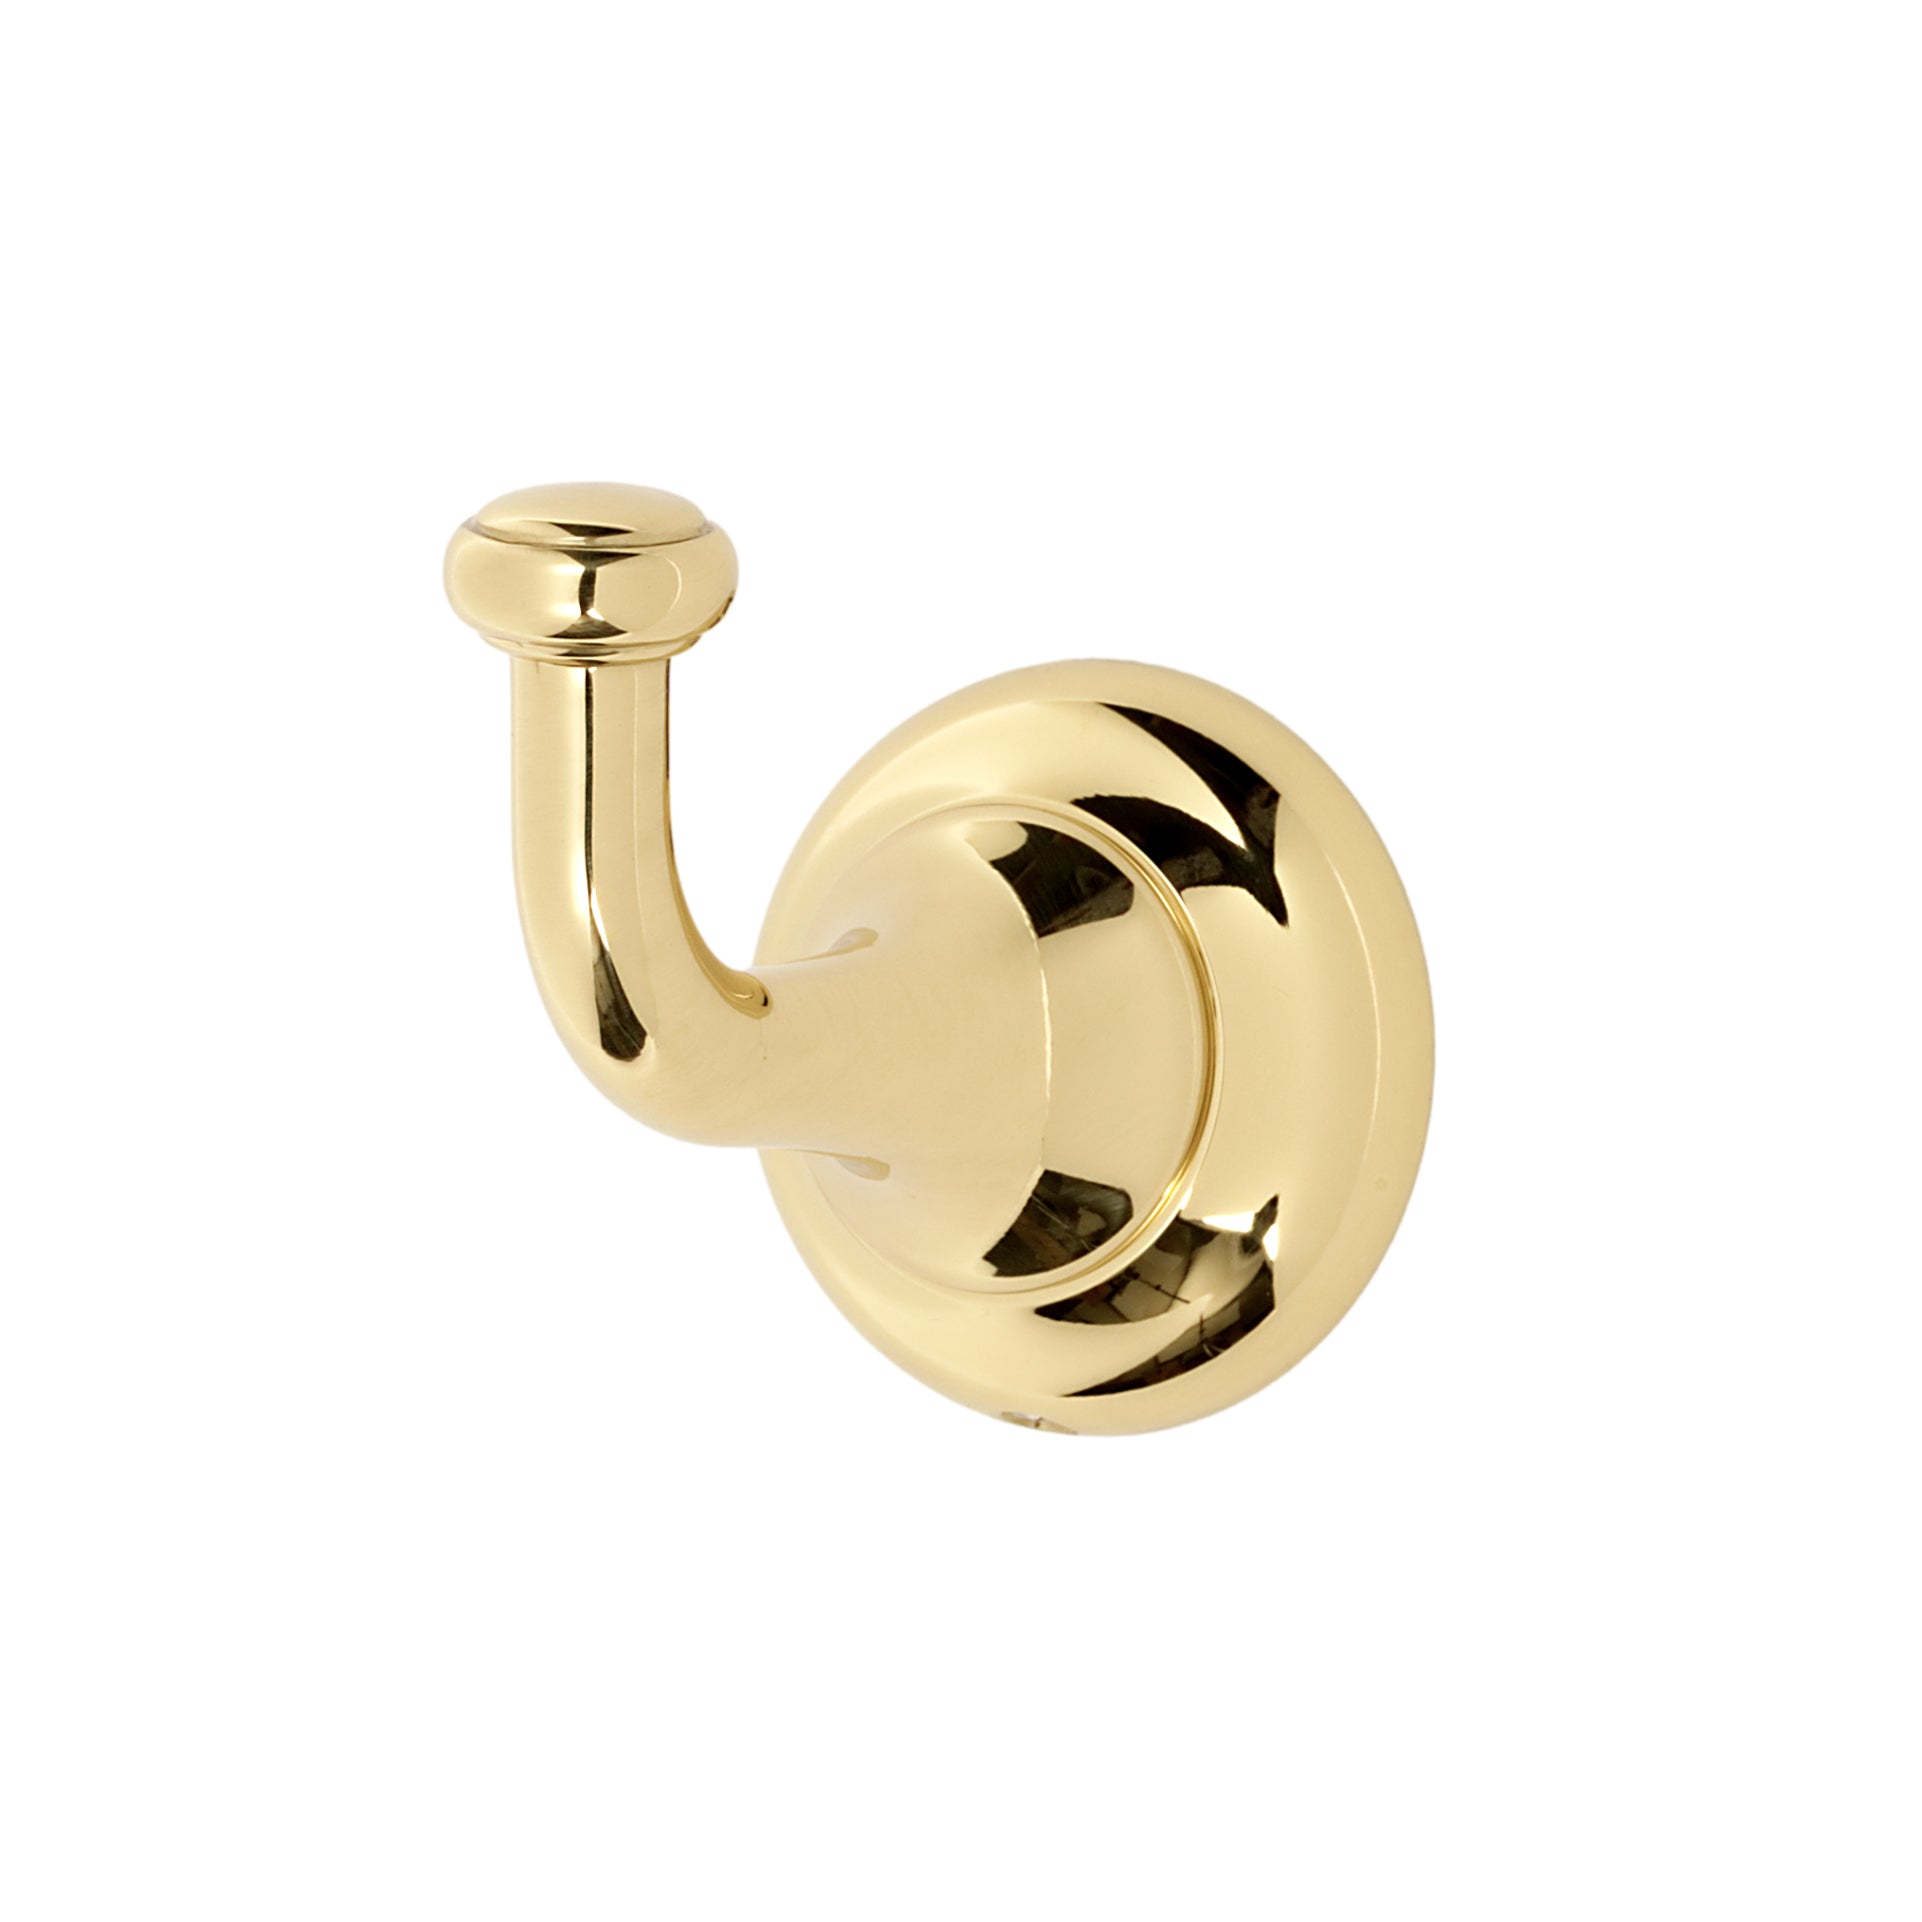 Polished Unlacquered Brass Wall Coat Hook